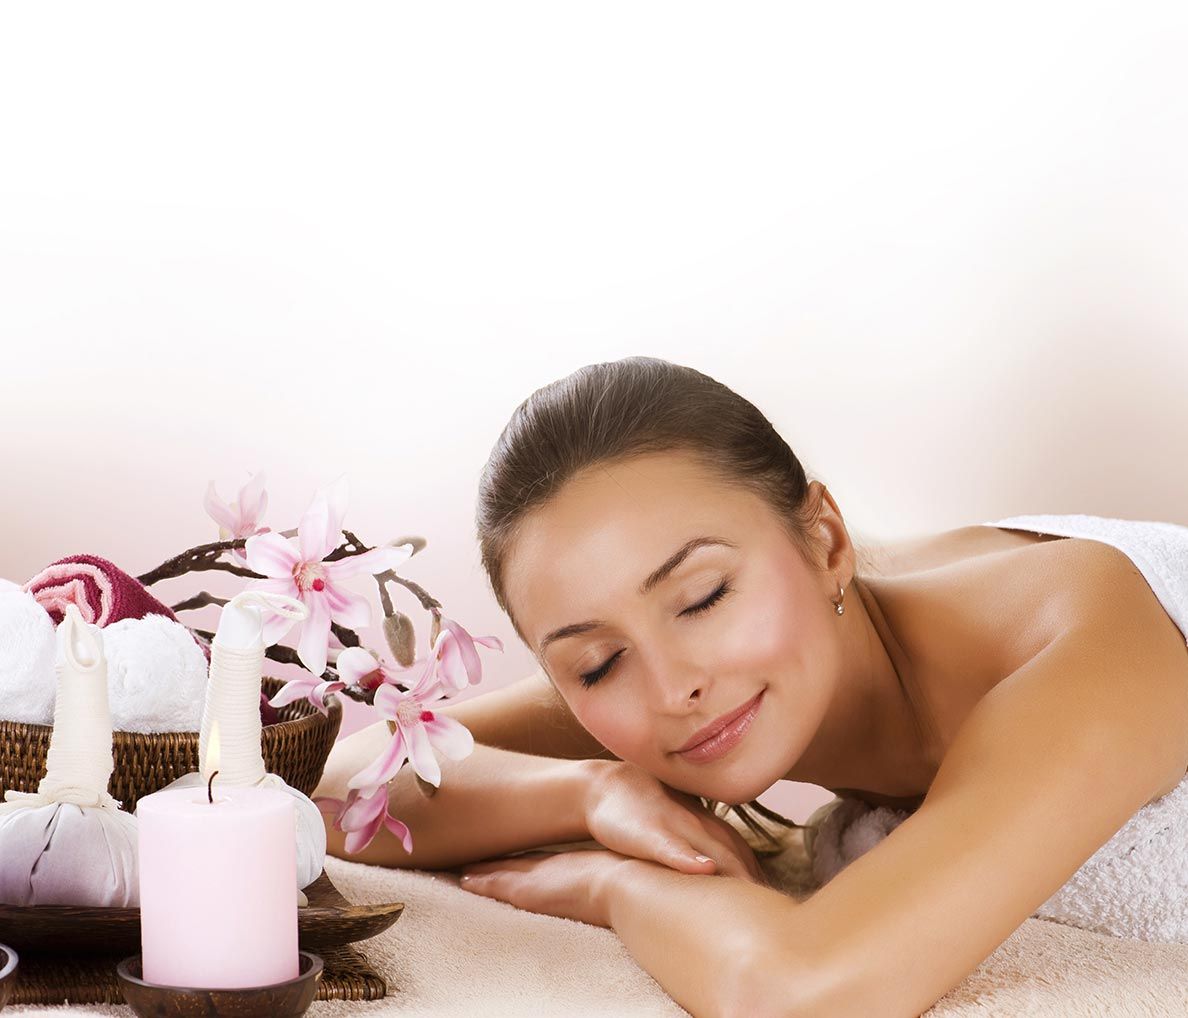 Aristocracy Salon & Day Spa is one of the best hair salons and day spas in downtown Plymouth, MA